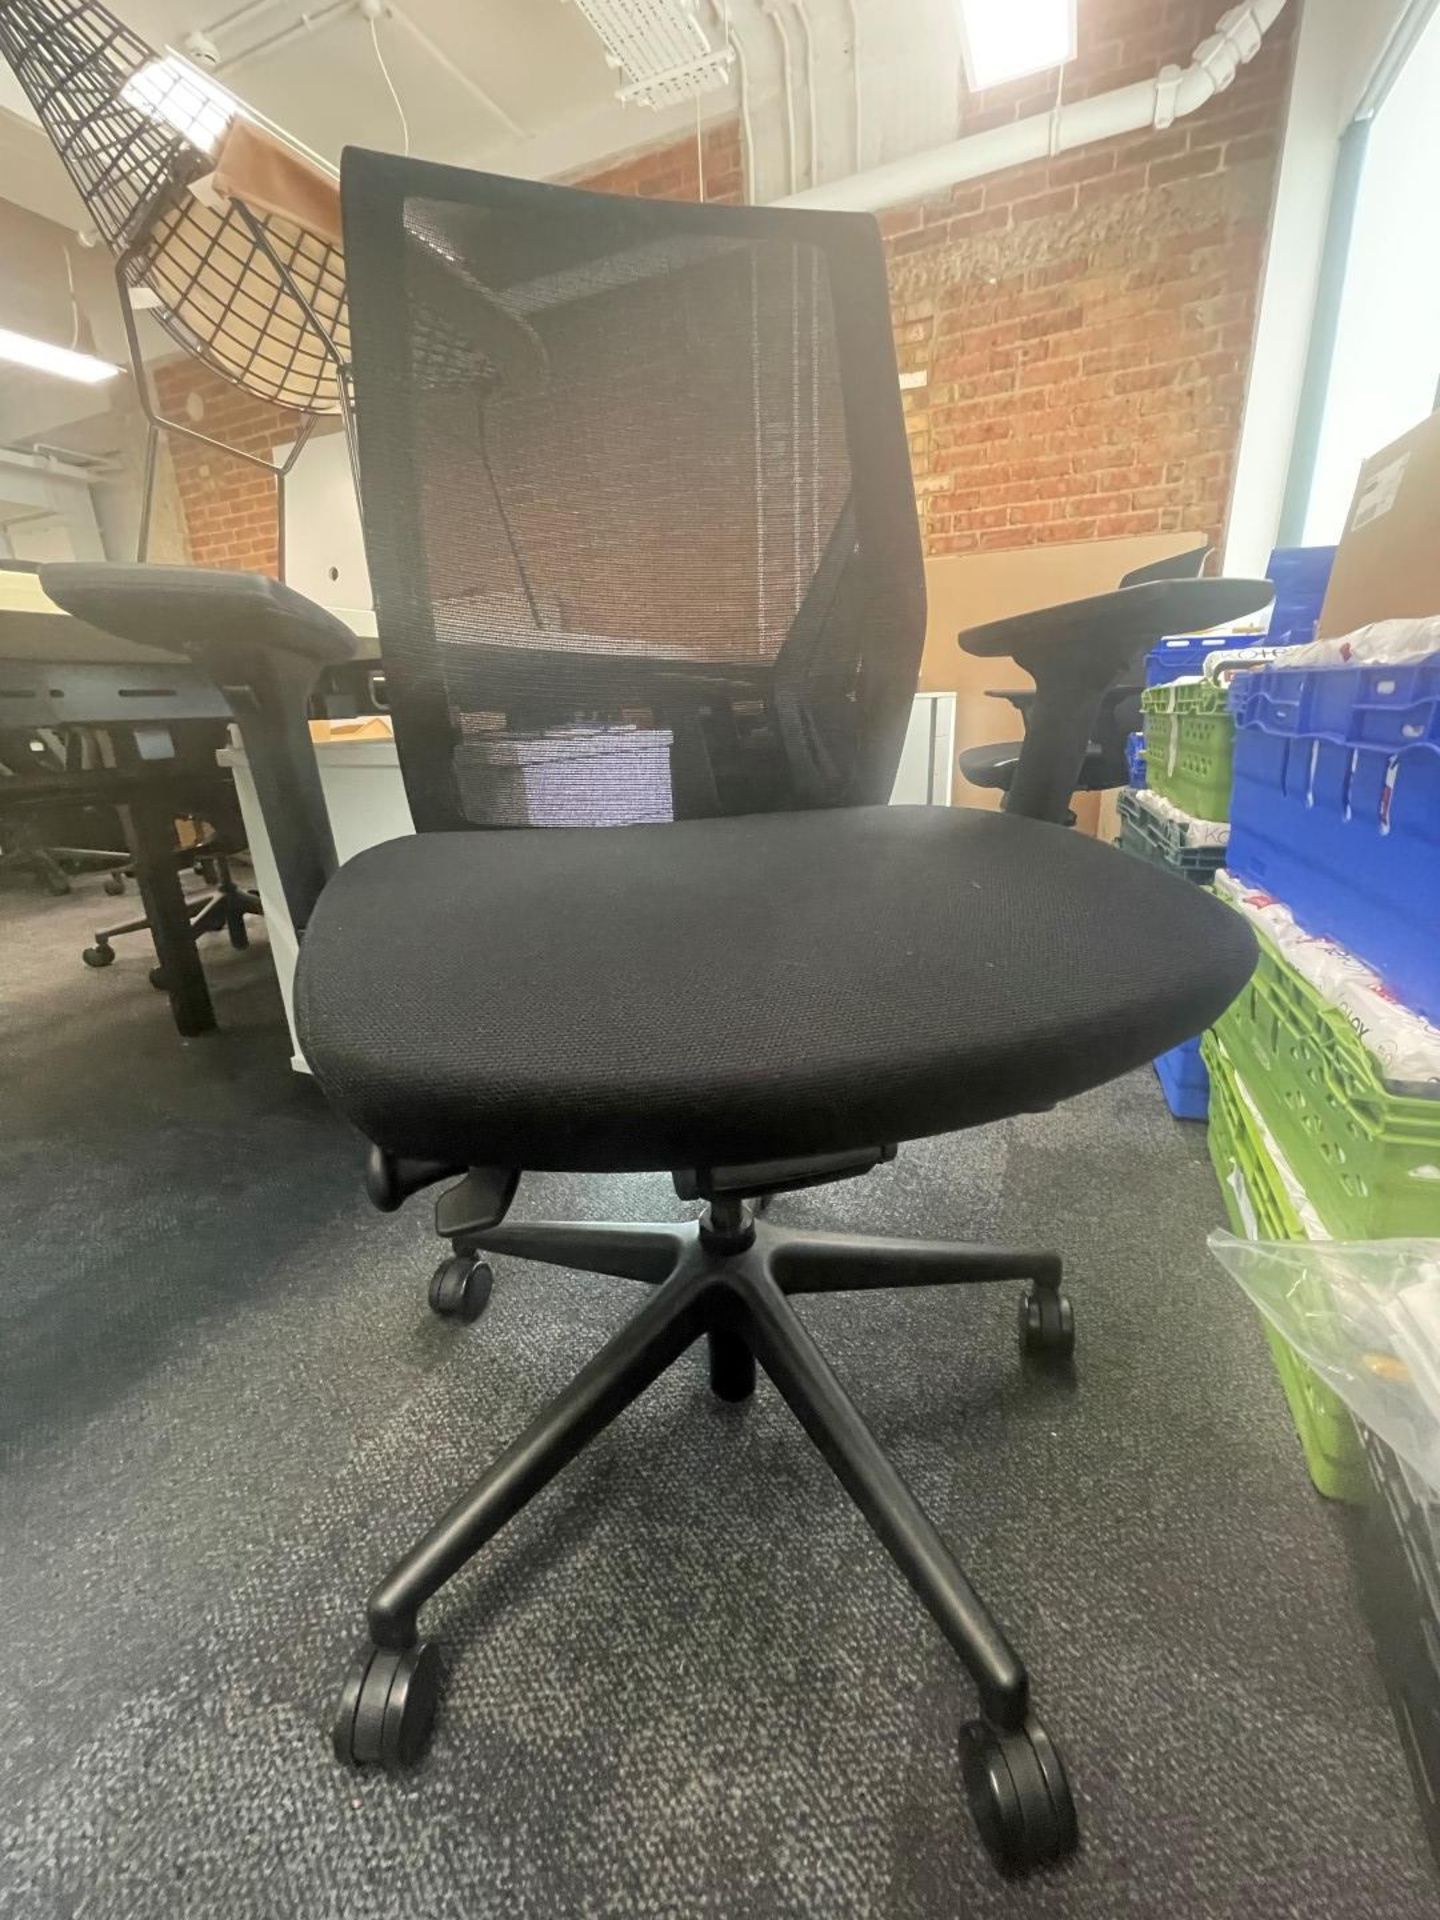 10 x BESTUHL J1 Ergonomic Office Chairs - To Be Removed From An Executive Office Environment - - Image 13 of 15